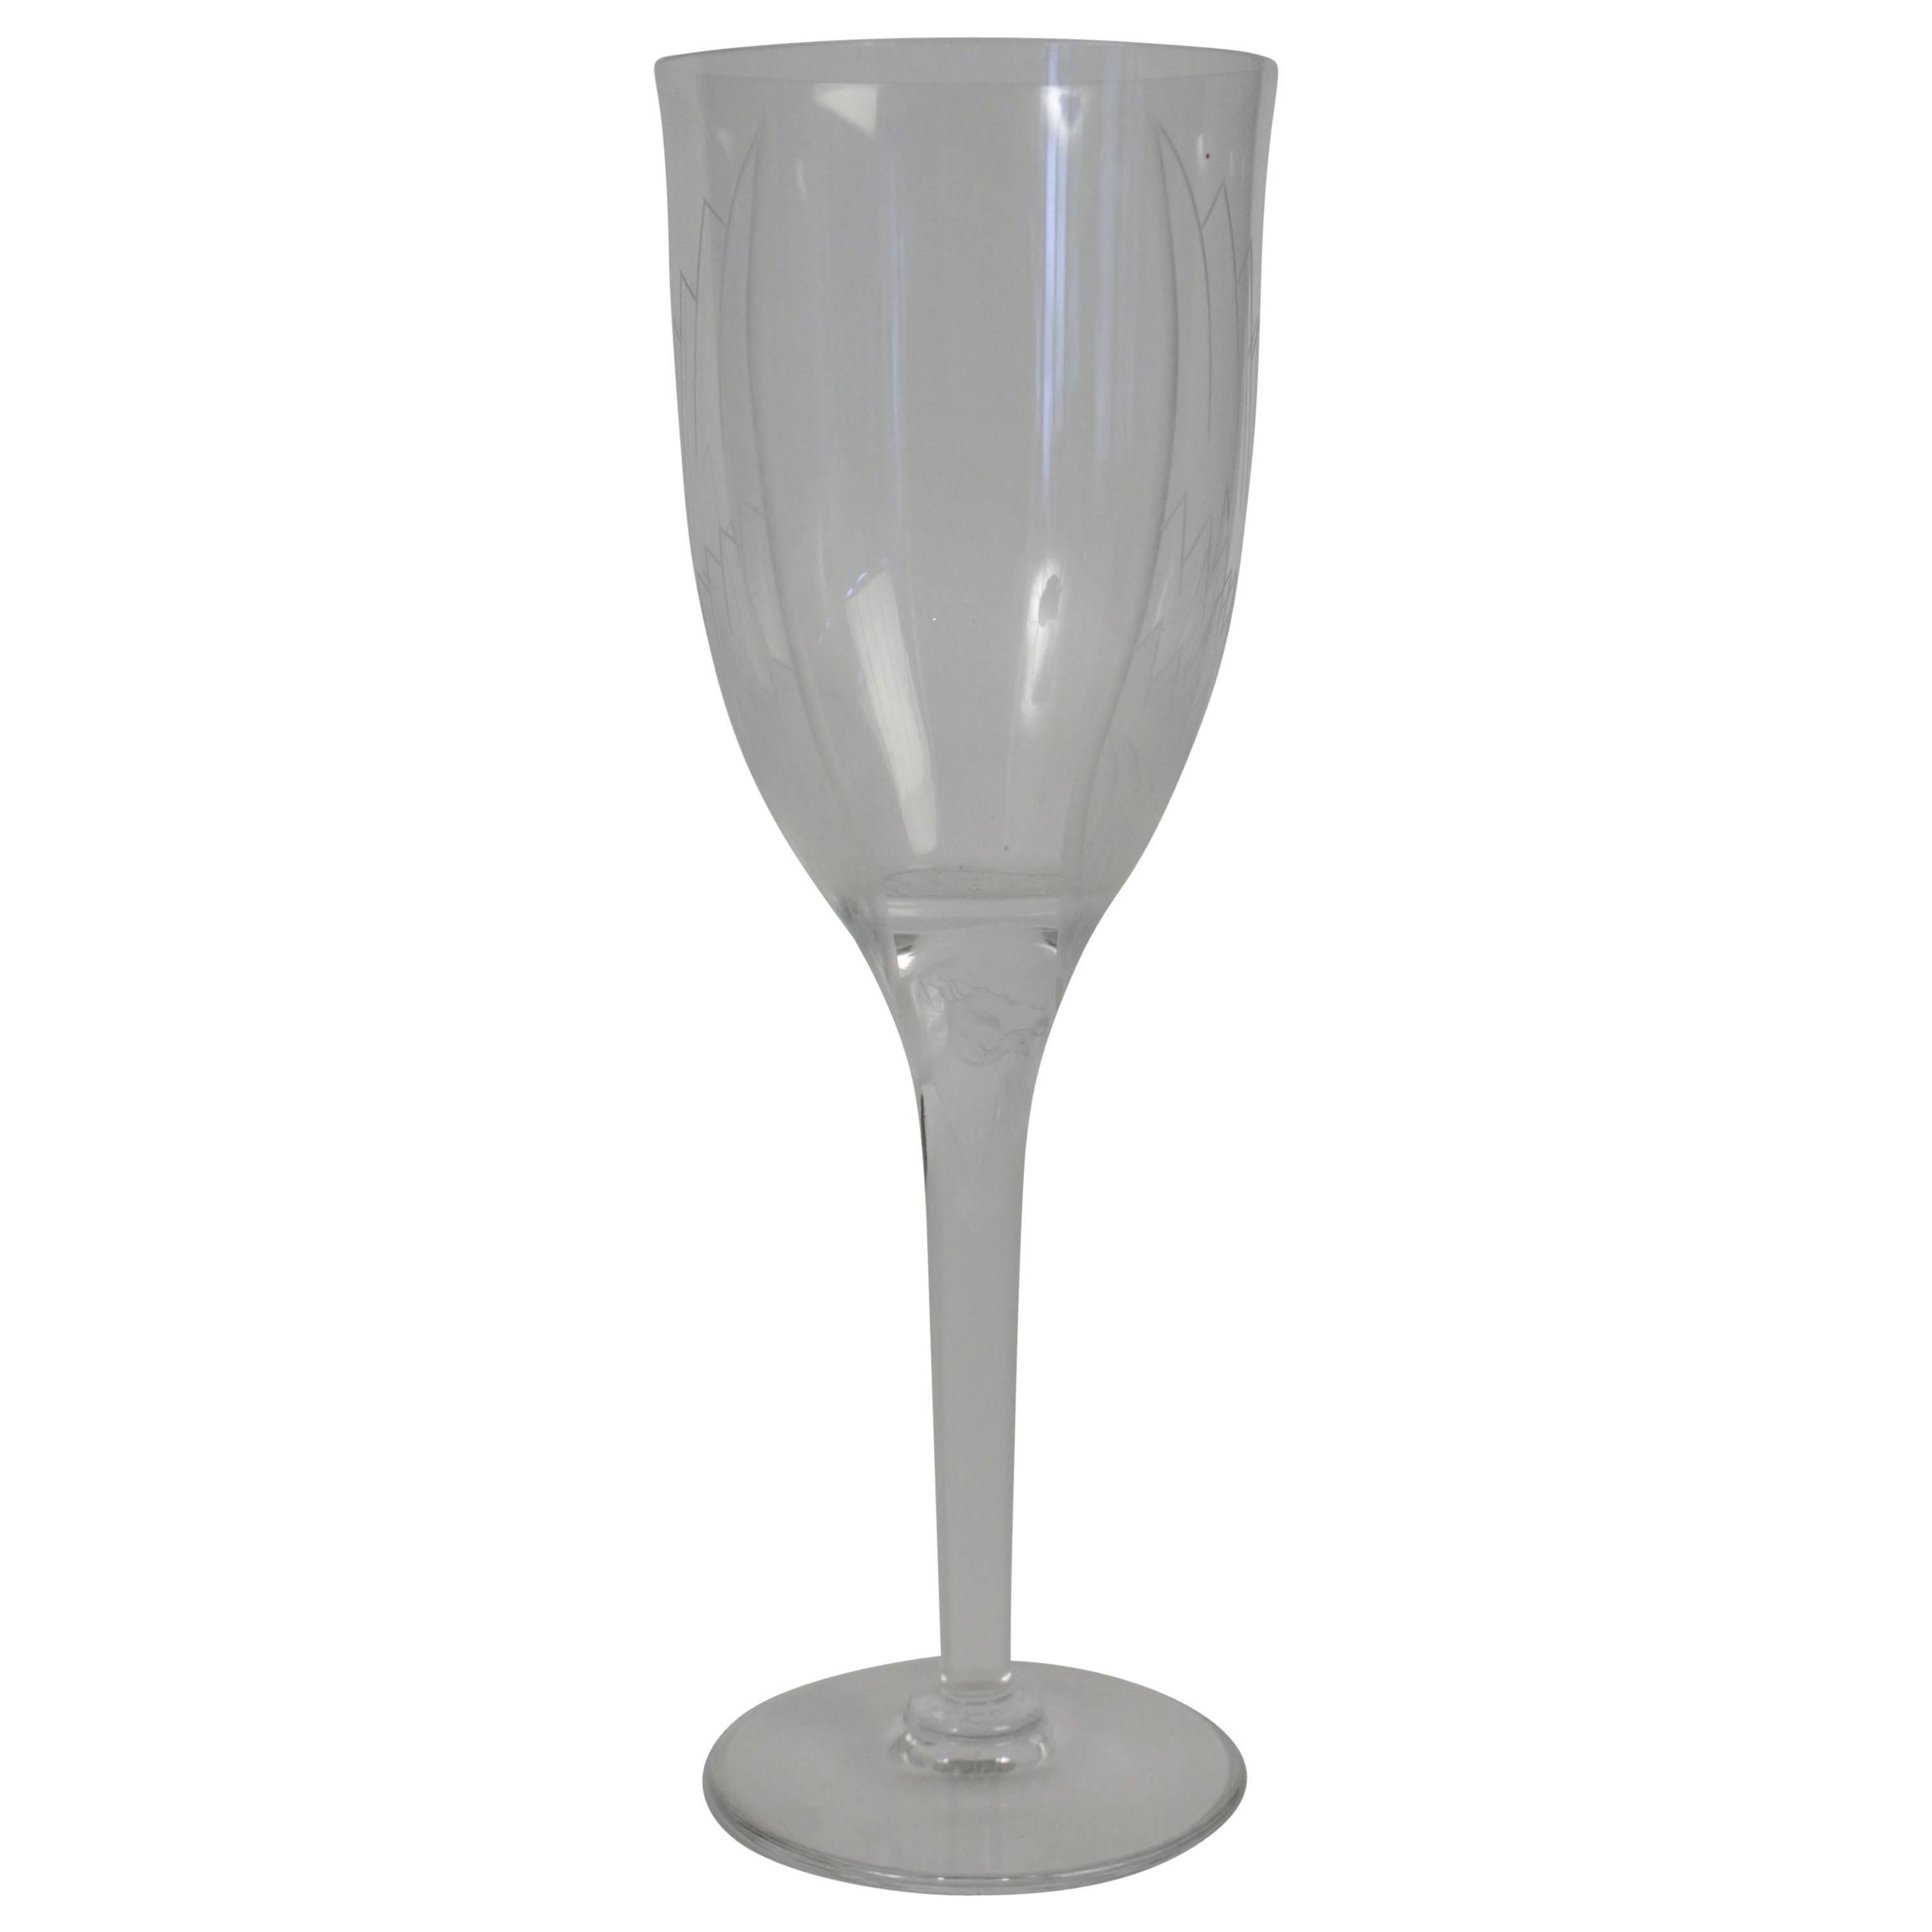 Marc Lalique "Ange" Champagne Glass "Sourire de Reims," 1948 For Sale at  1stDibs